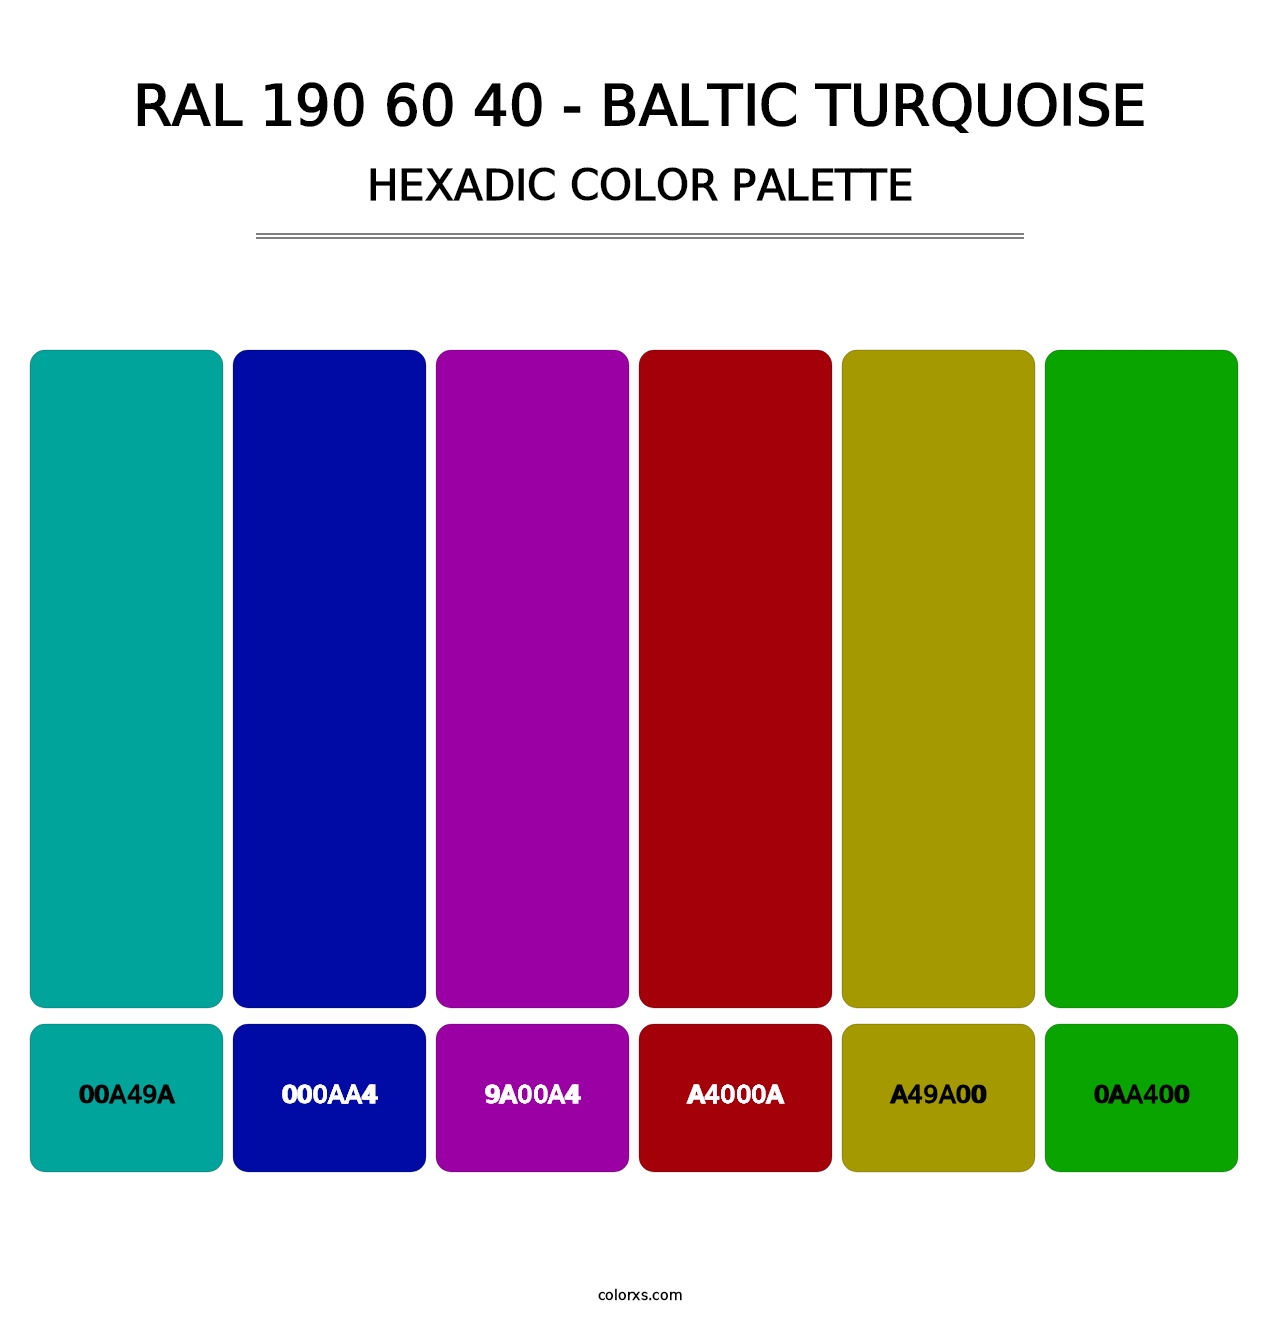 RAL 190 60 40 - Baltic Turquoise - Hexadic Color Palette